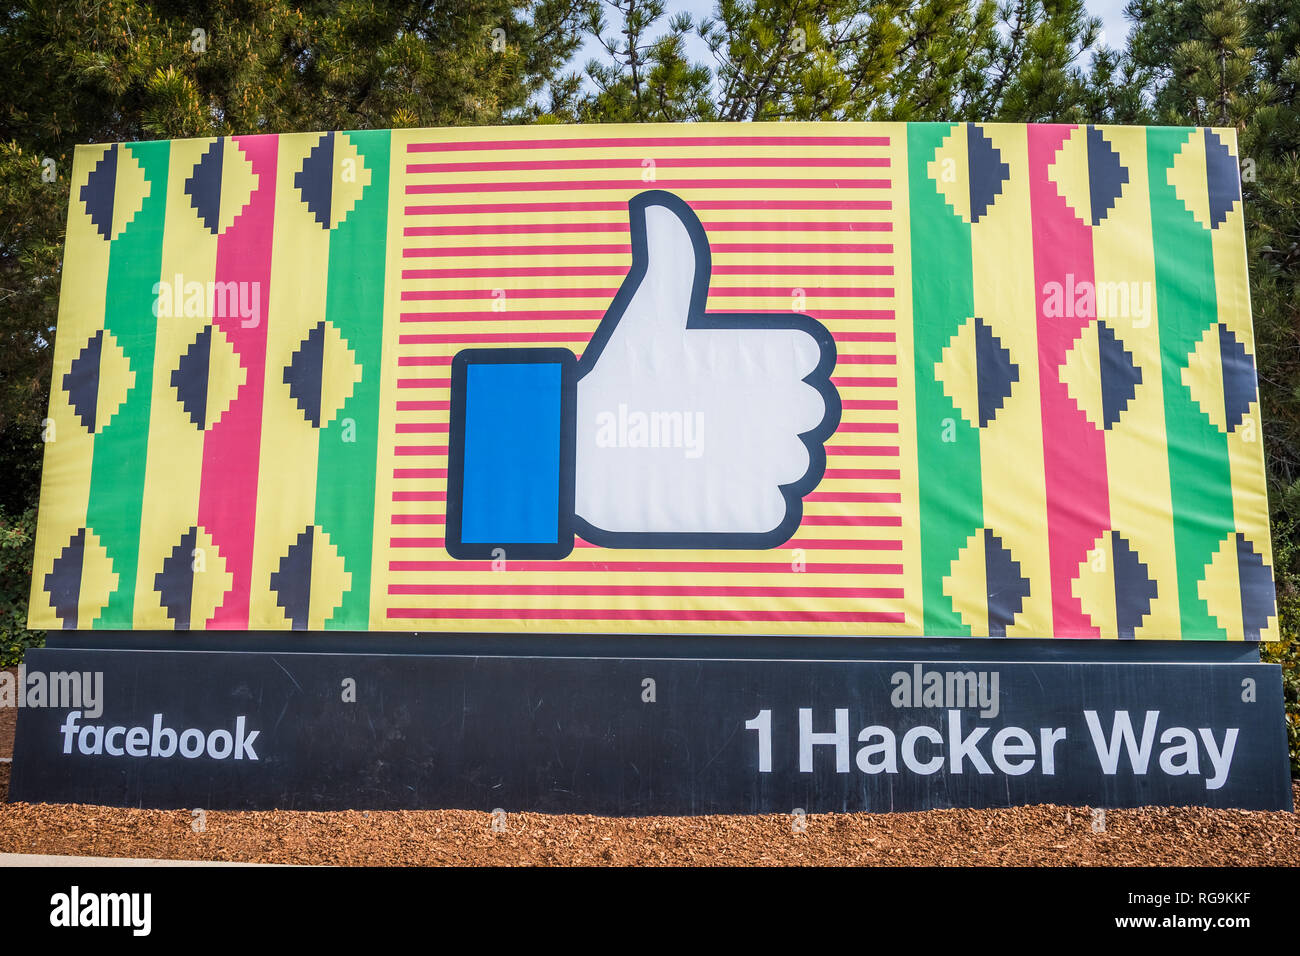 February 20, 2018 Menlo Park / CA / USA - Facebook corporate headquarters campus sign in Silicon Valley supporting black history month, San Francisco  Stock Photo